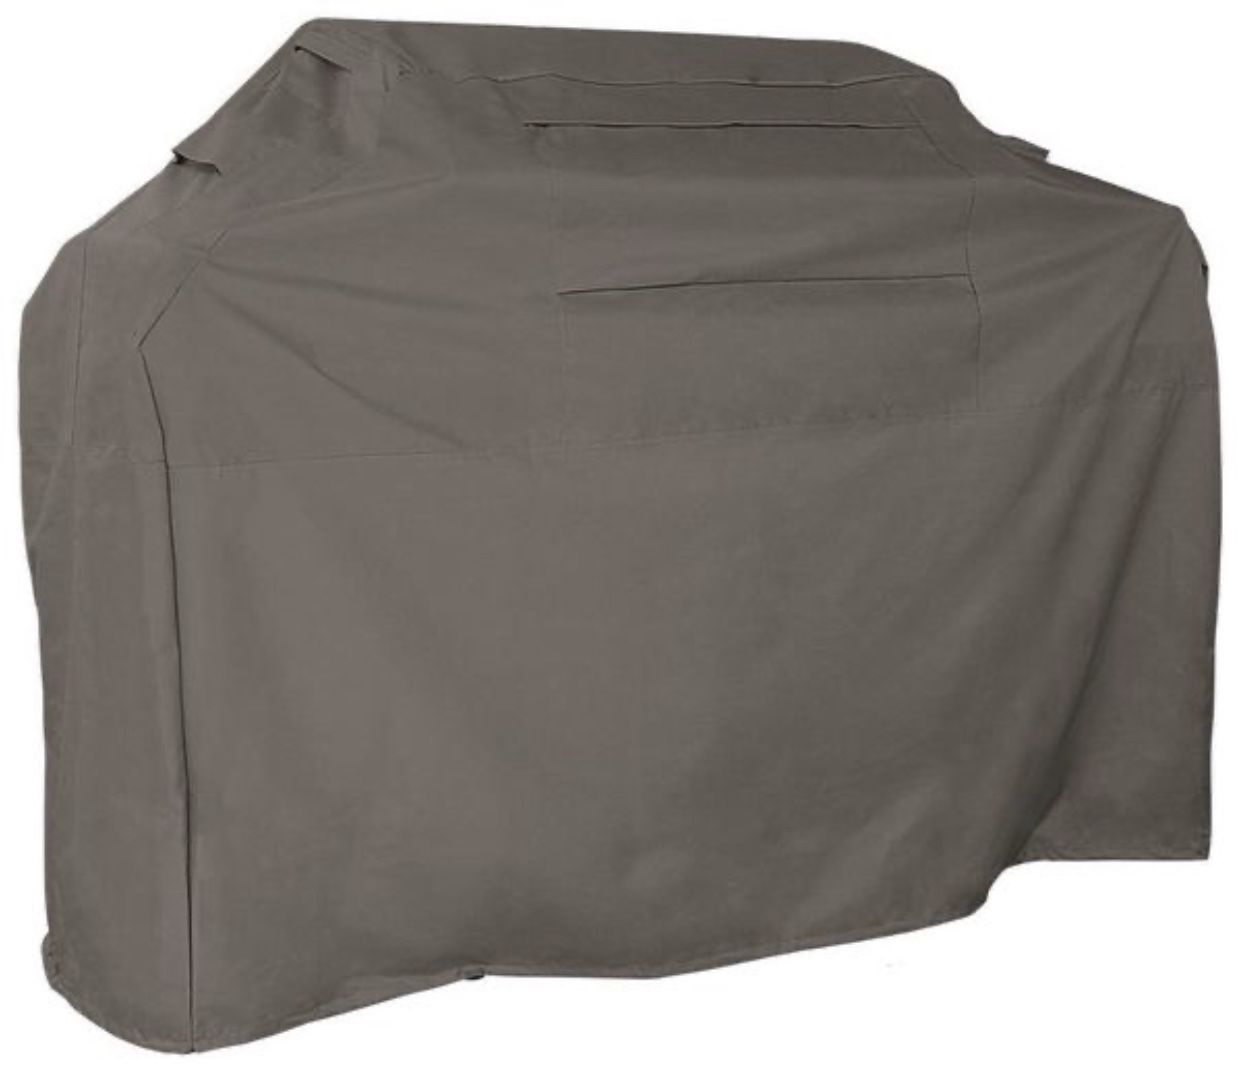 KHOMO GEAR TITAN Series, Waterproof Heavy Duty BBQ Grill Cover, Grey Medium 58 x 24 x 48, Different Sizes Available, Compatible with Weber (Genesis),